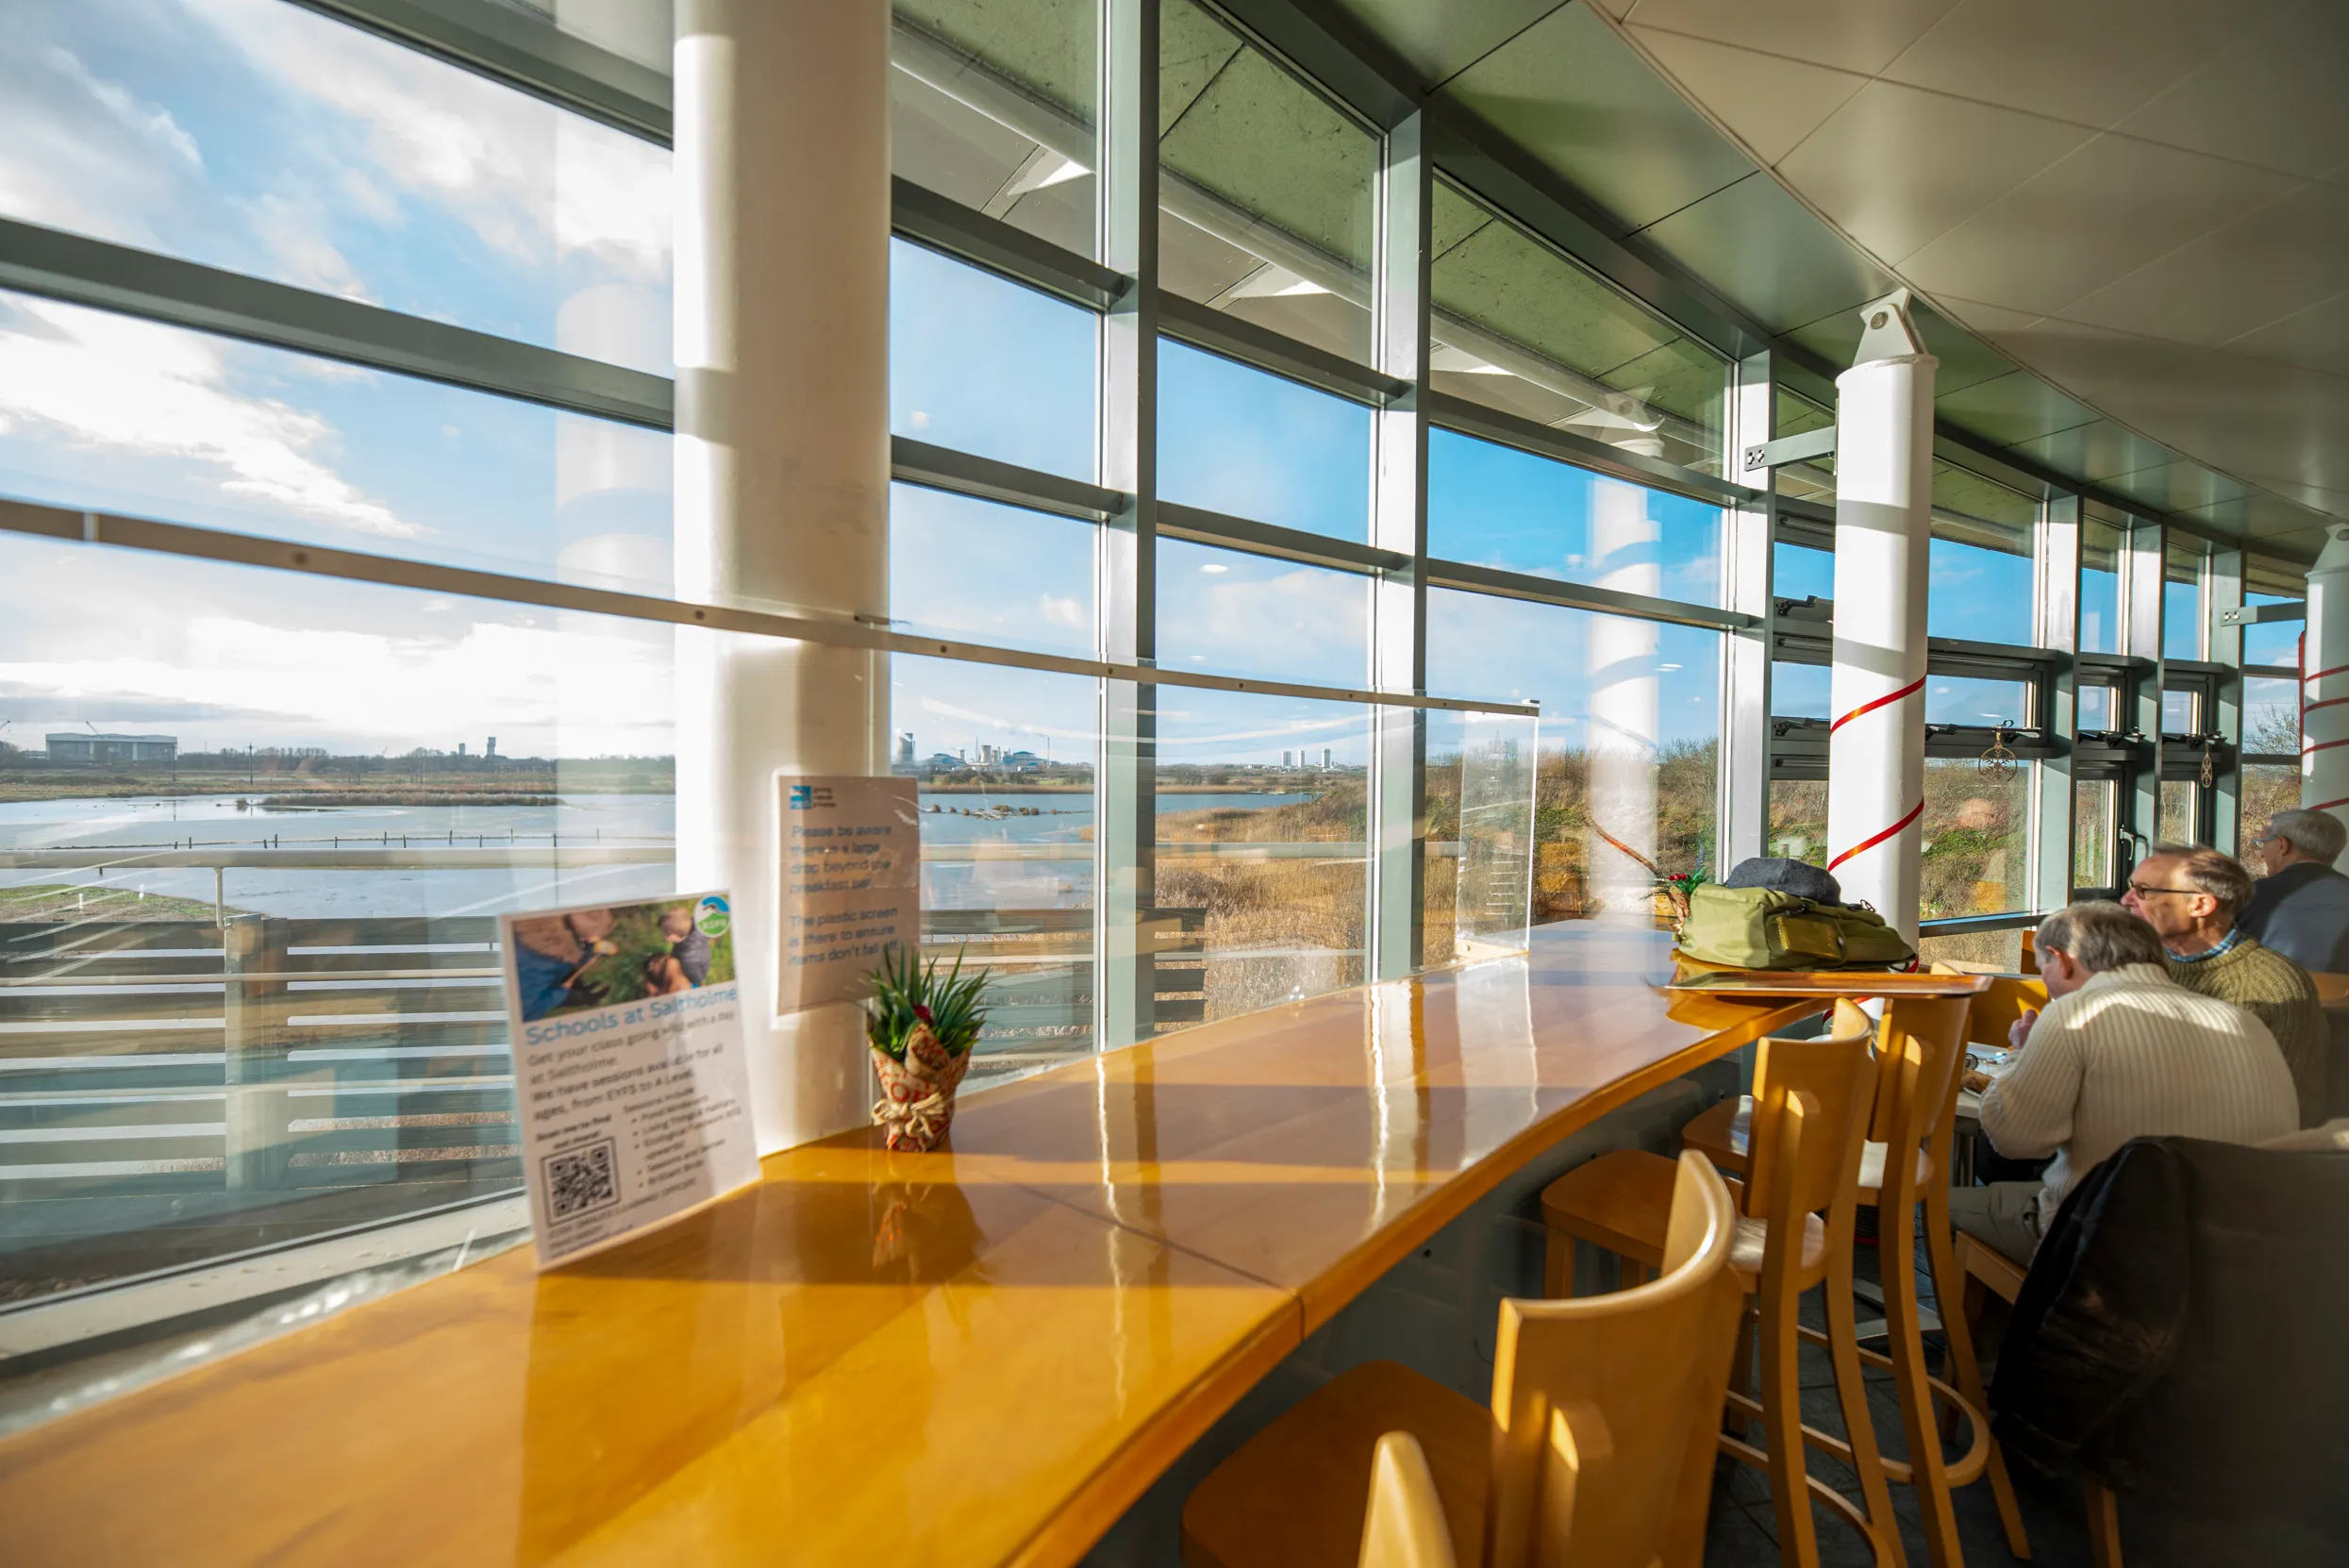 Visitors at Saltholme café, taking in the view of the water out of the large, curved windows.